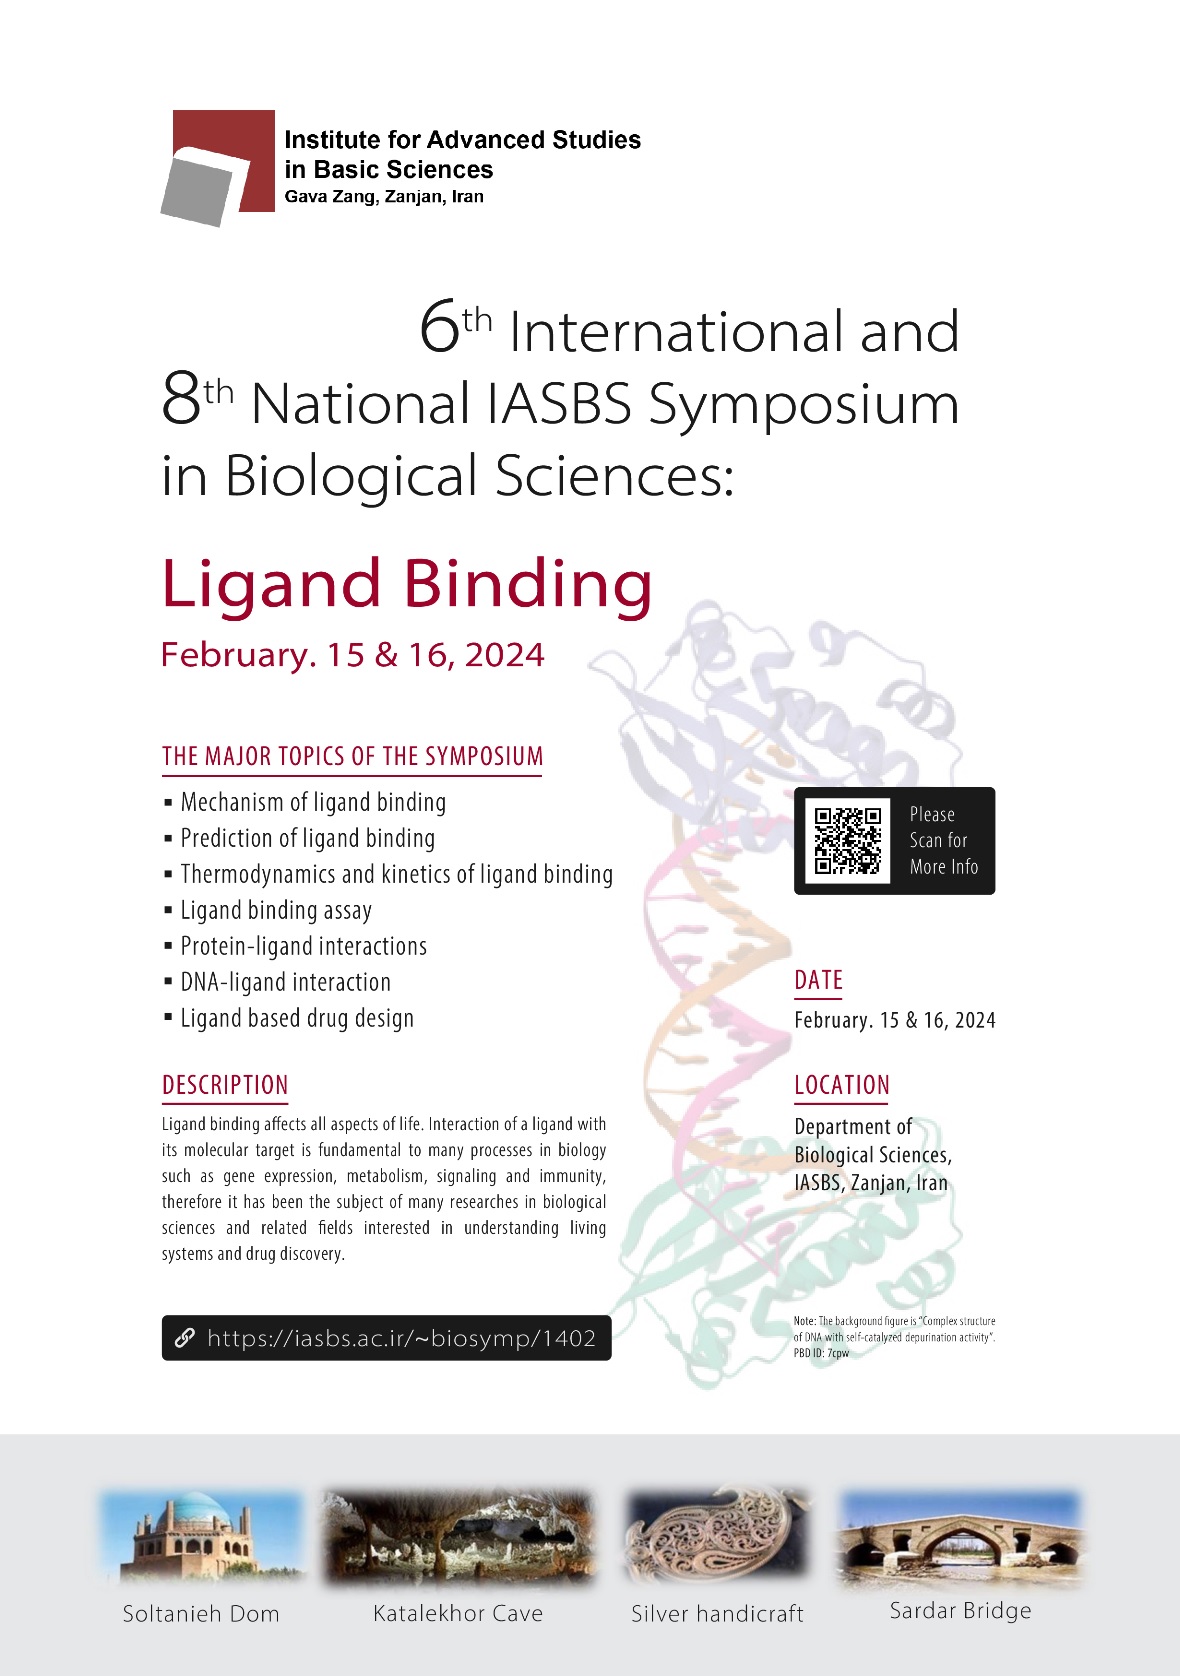 the 6th International IASBS (Institute for Advanced Studies in Basic Sciences) Conference on Biological Sciences: Ligand Binding